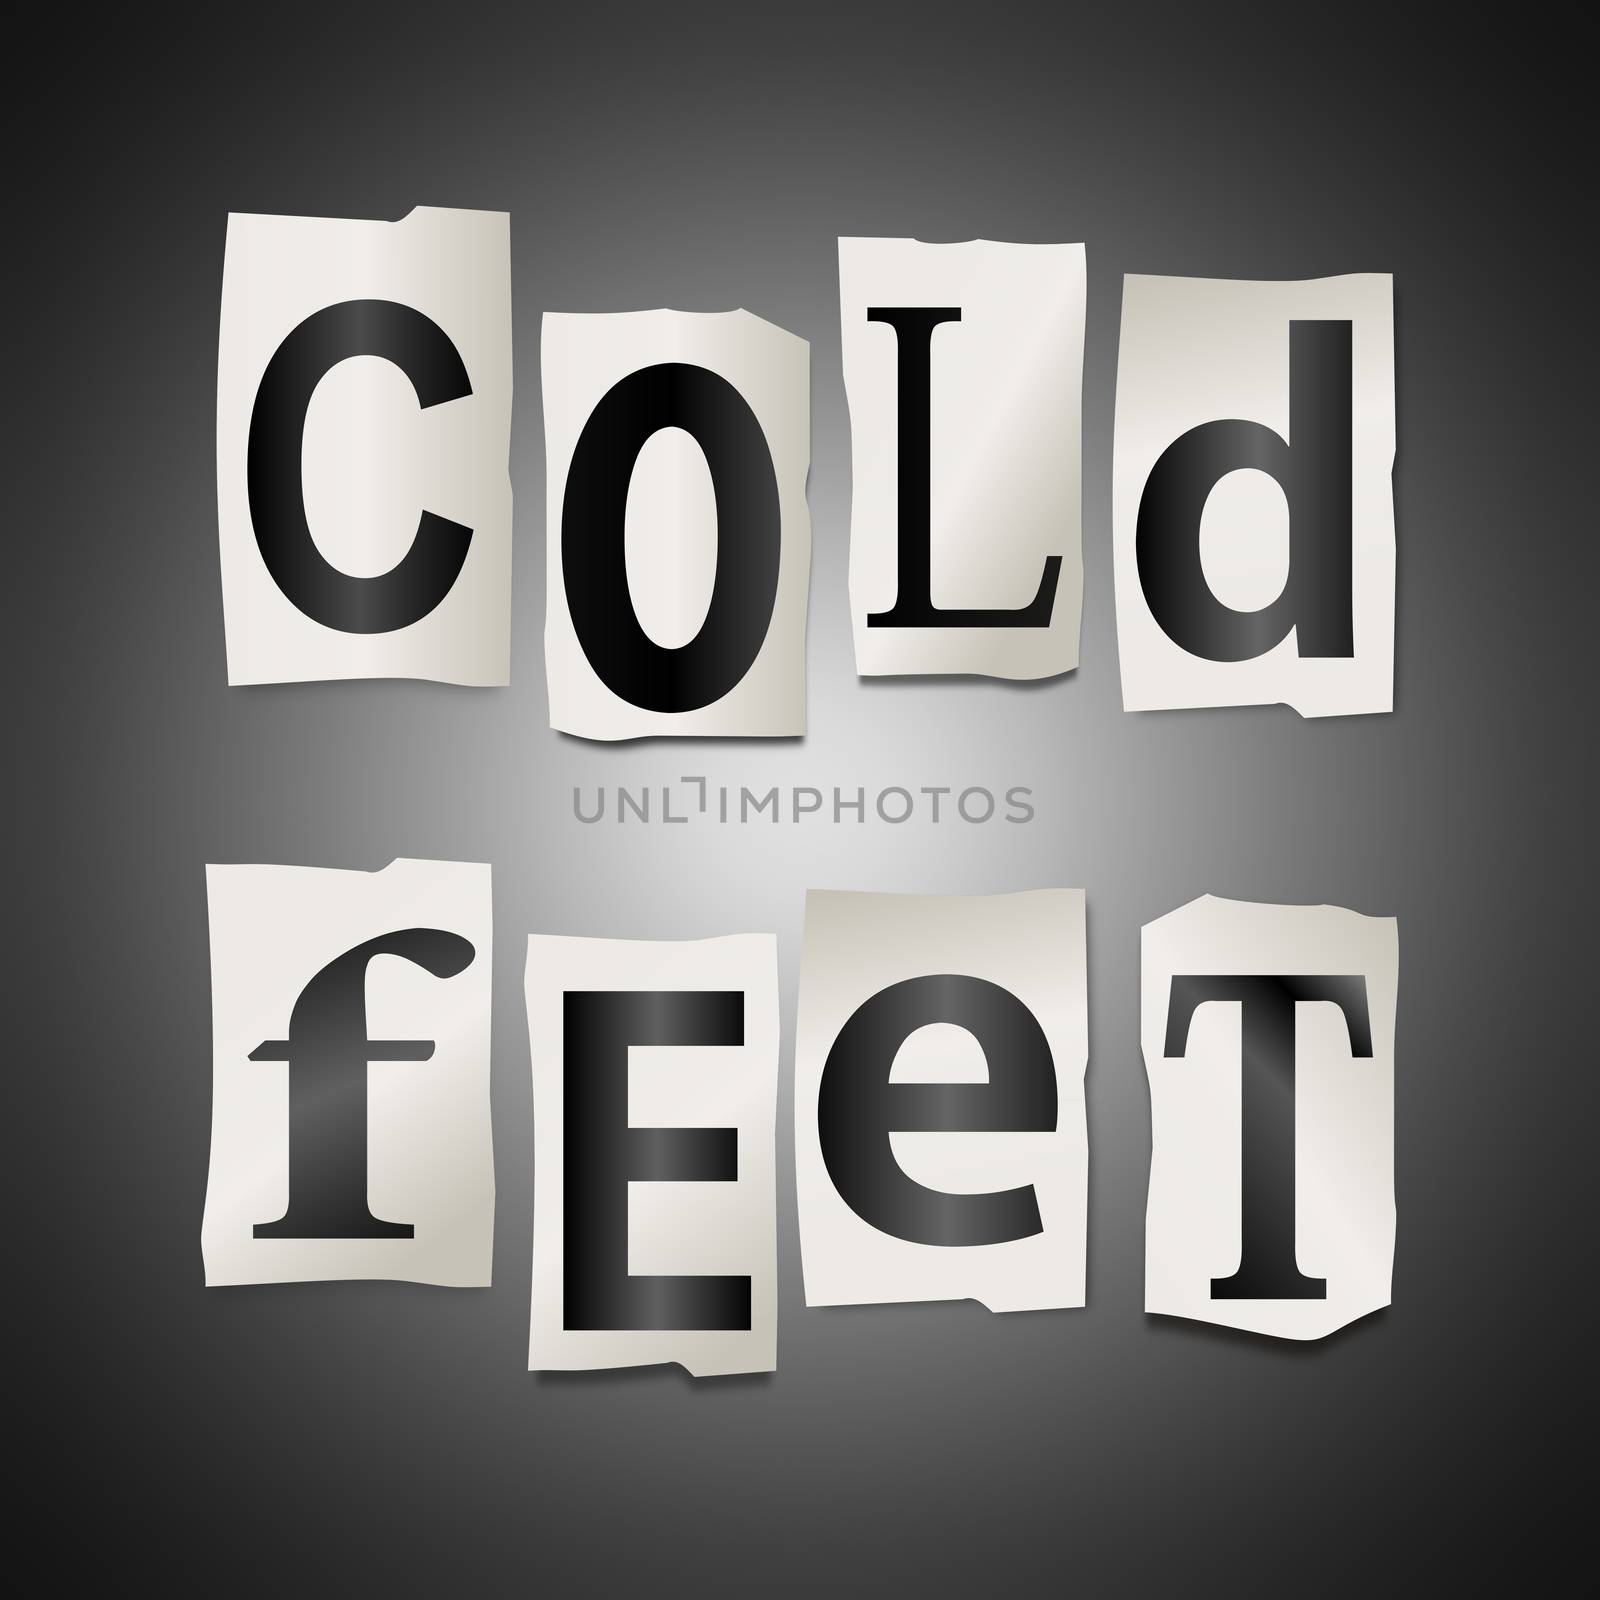 Illustration depicting a set of cut out printed letters formed to arrange the words cold feet.